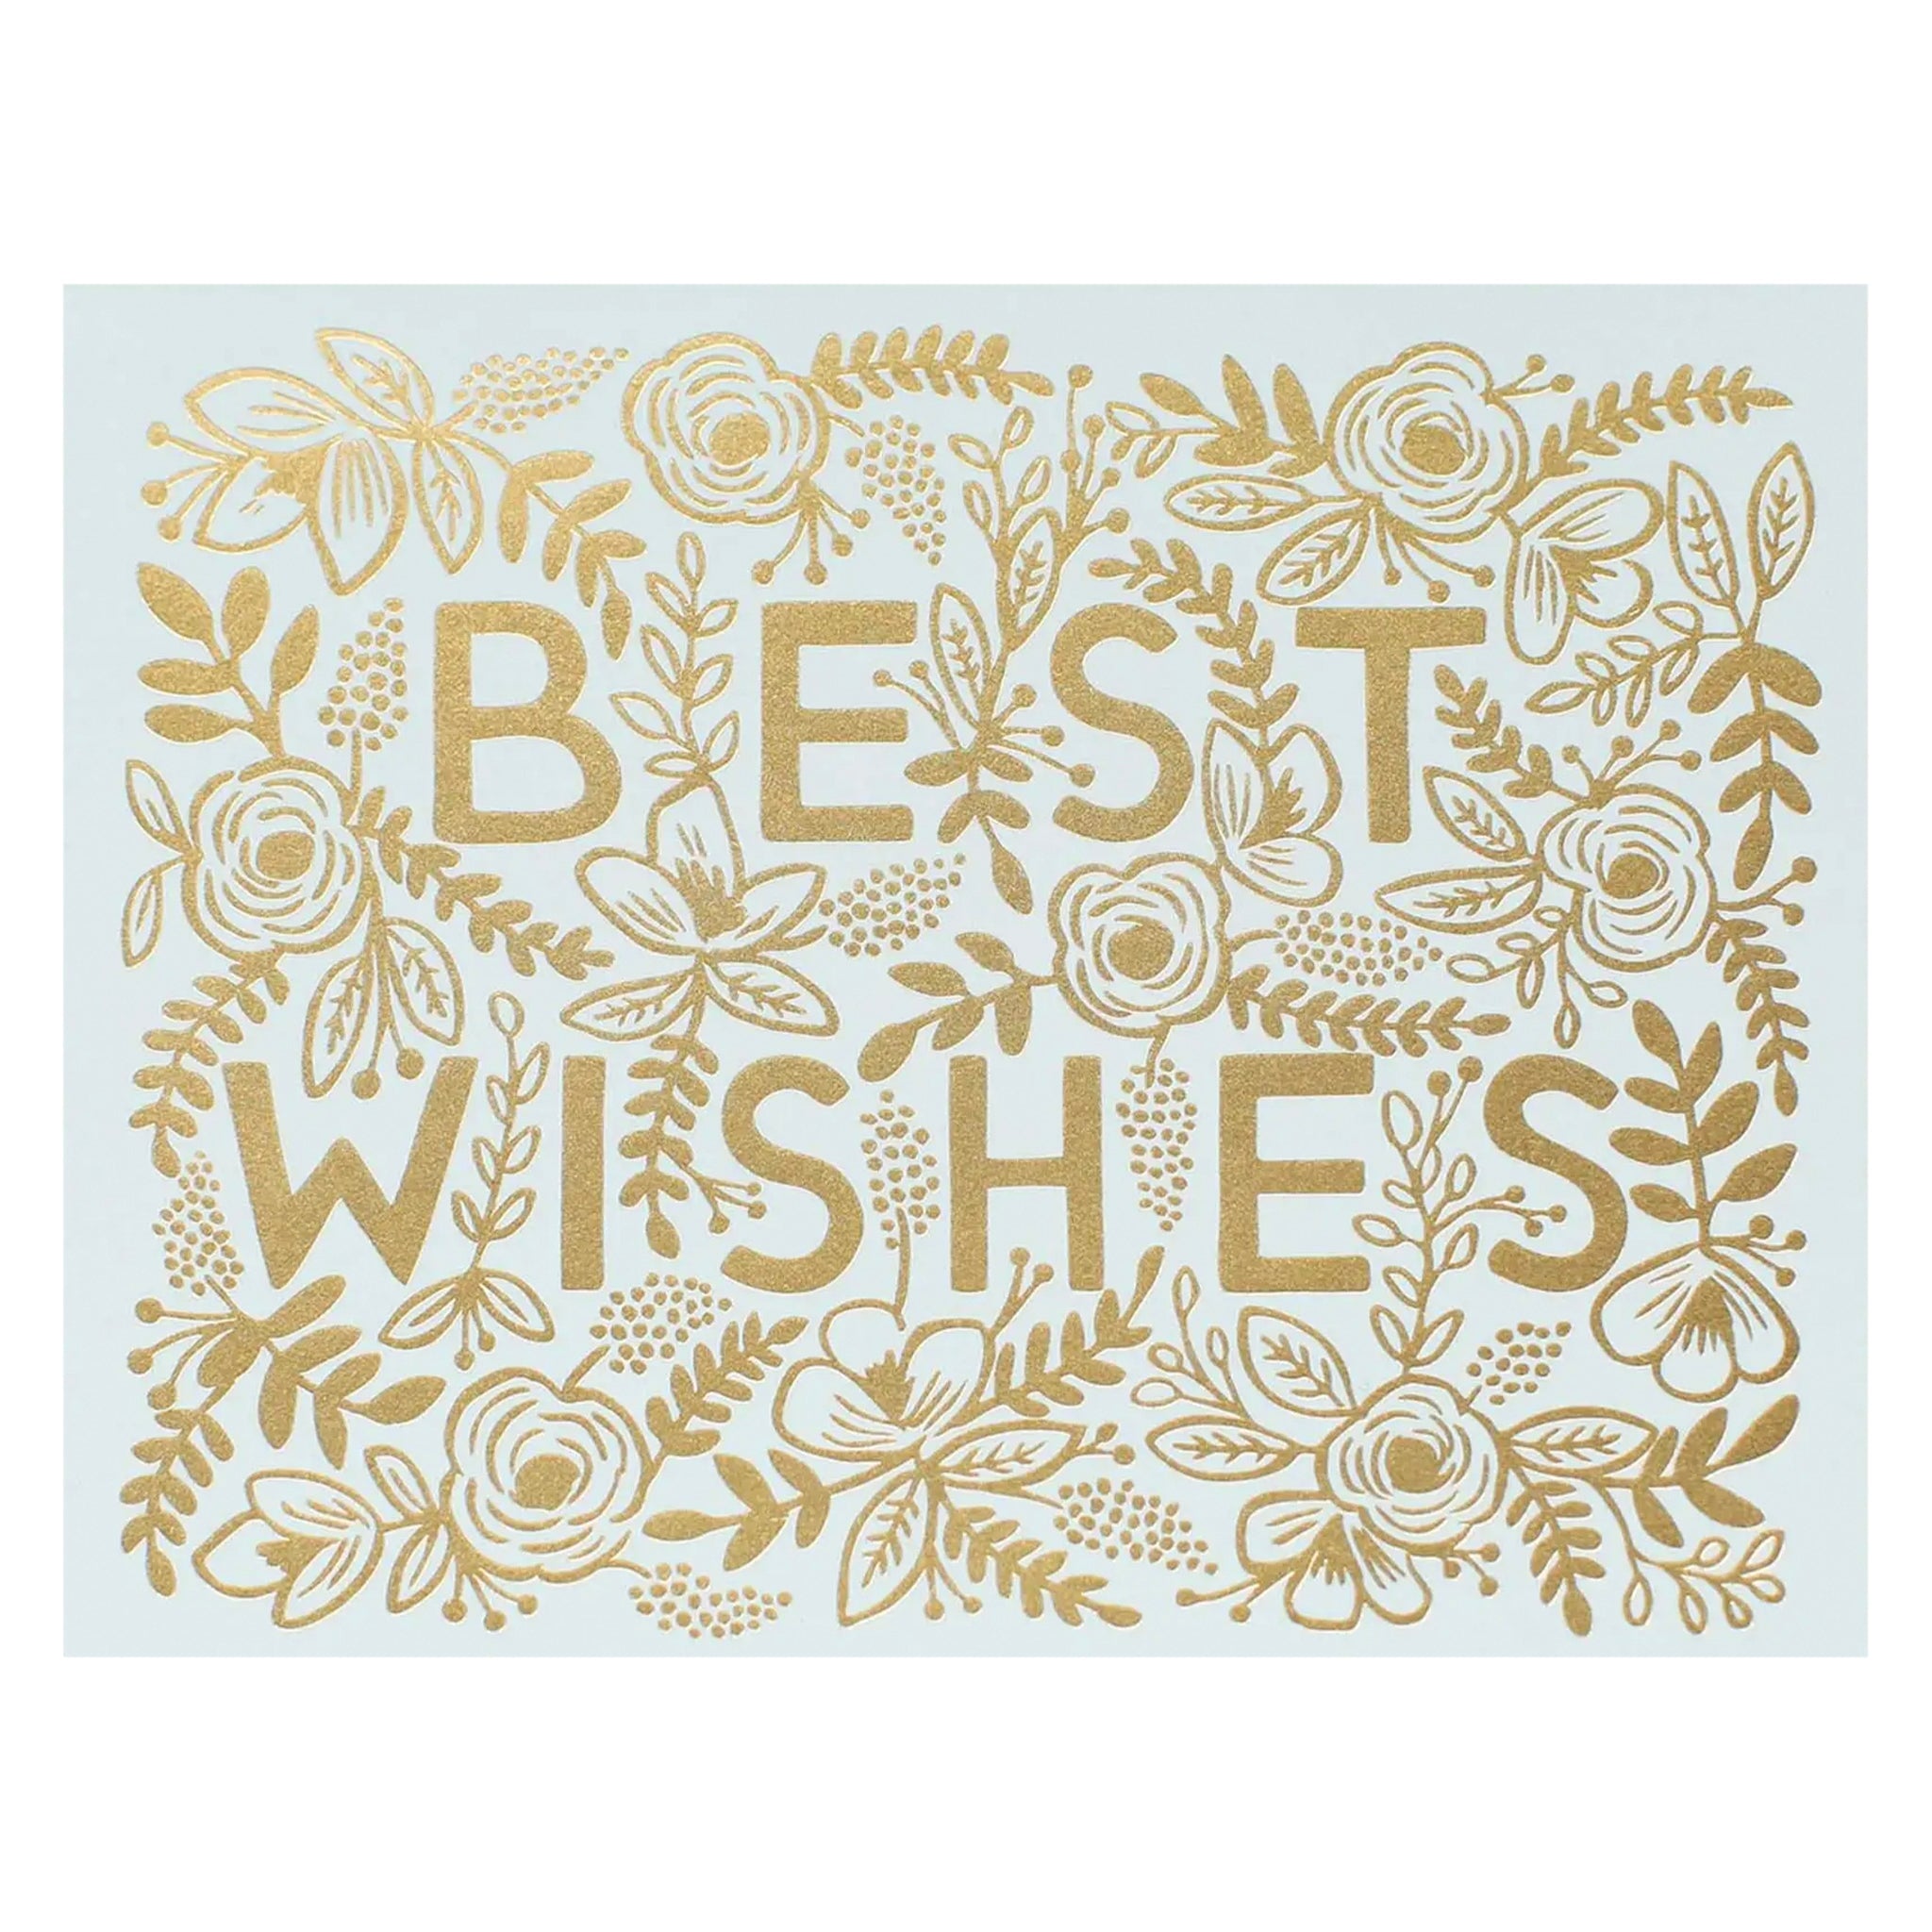 Rifle Paper US Card - Golden Best Wishes - Tea Pea Home